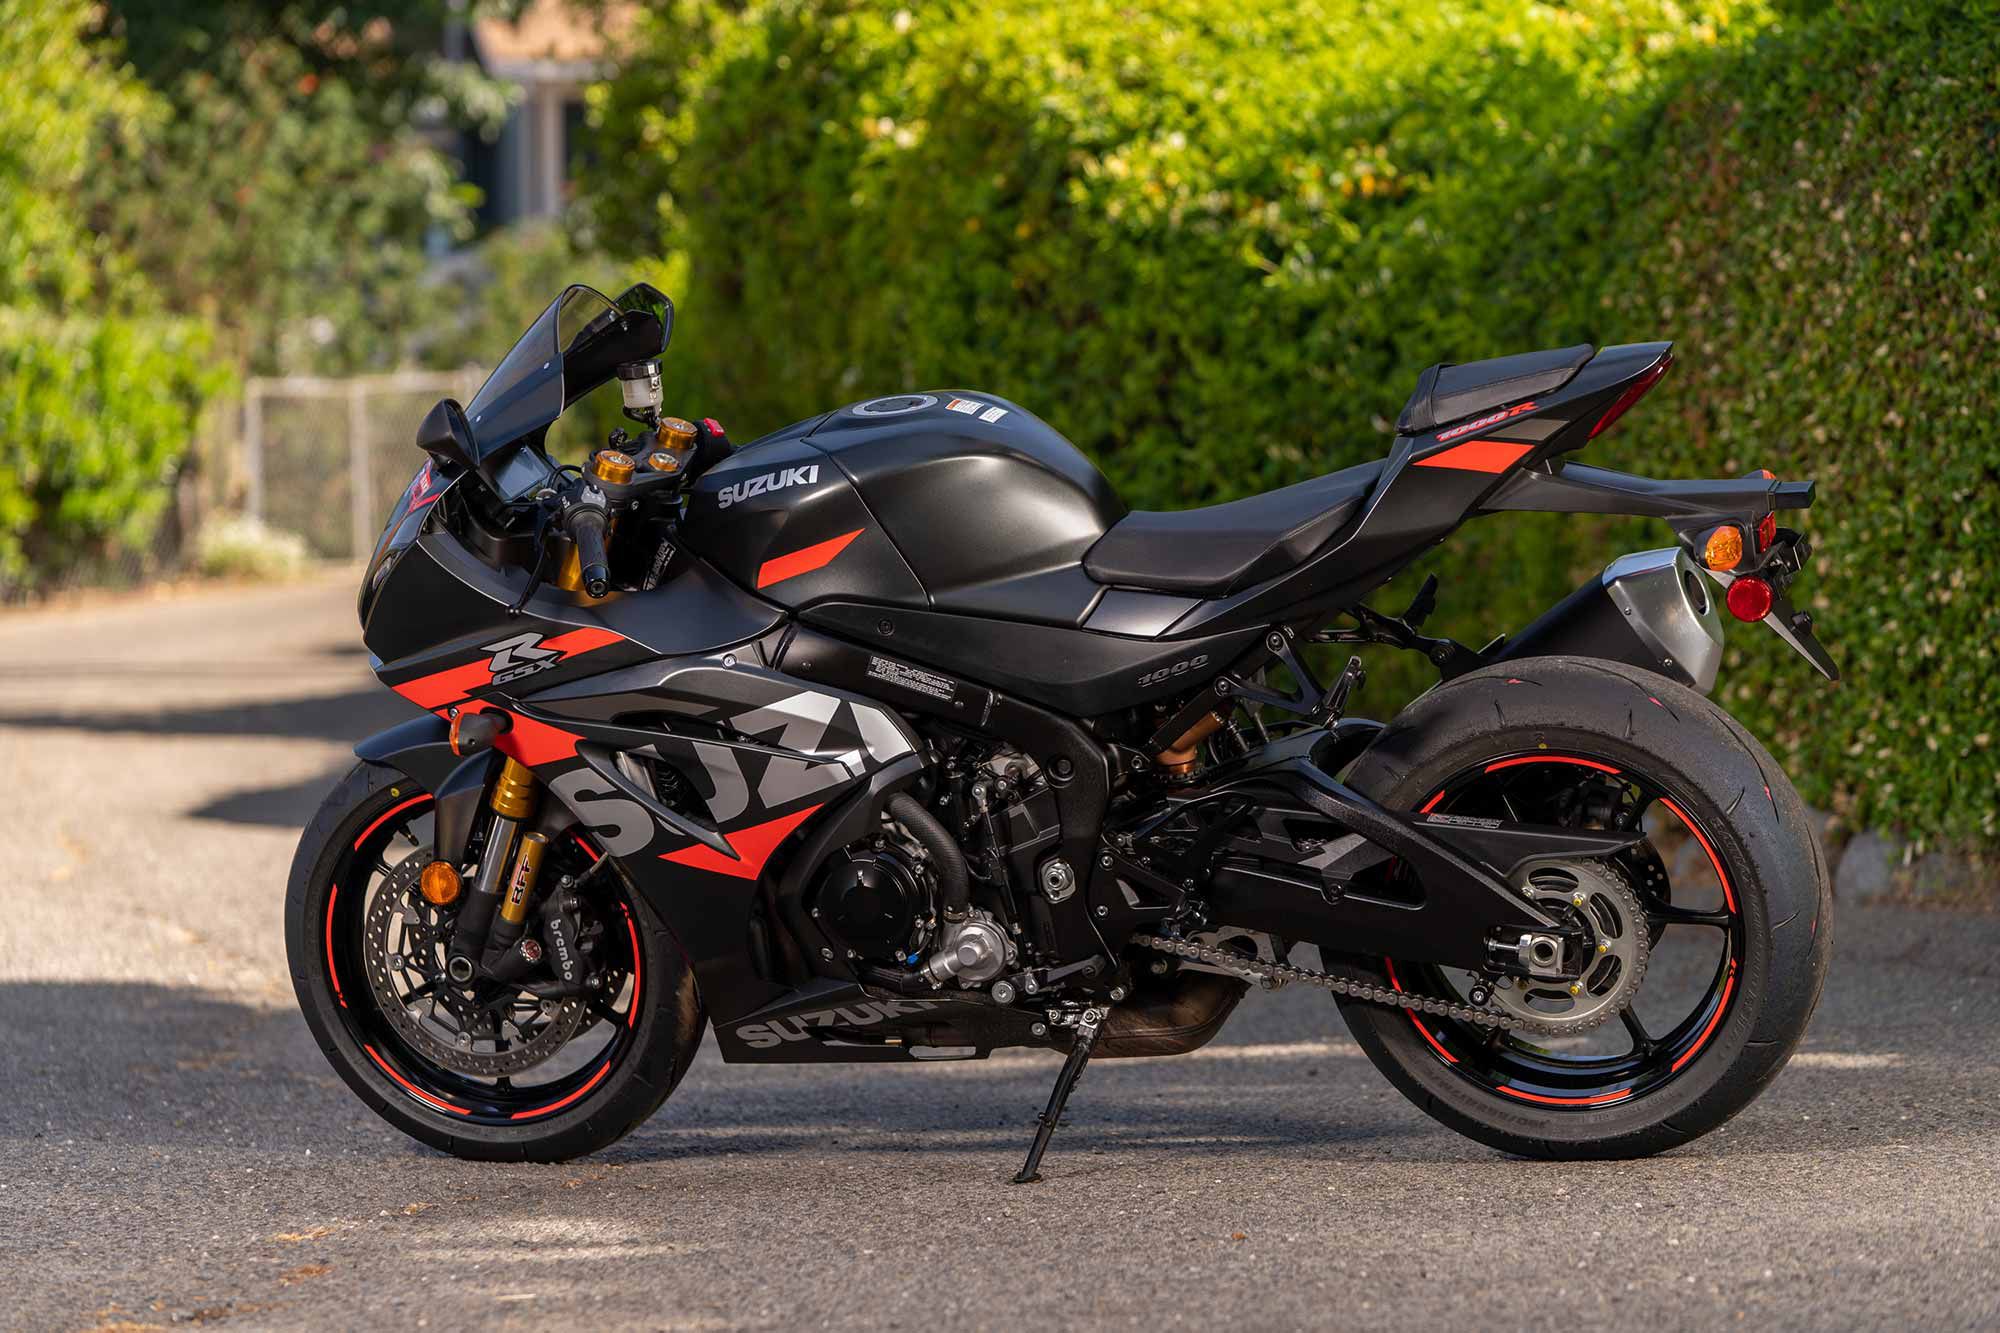 The 2021 GSX-R1000R commands an additional $1,950 versus the base GSX-R1000. For that upcharge you get higher specification suspension, an bi-directional quickshifter, launch control, steel-braided front brake lines, and cornering ABS.